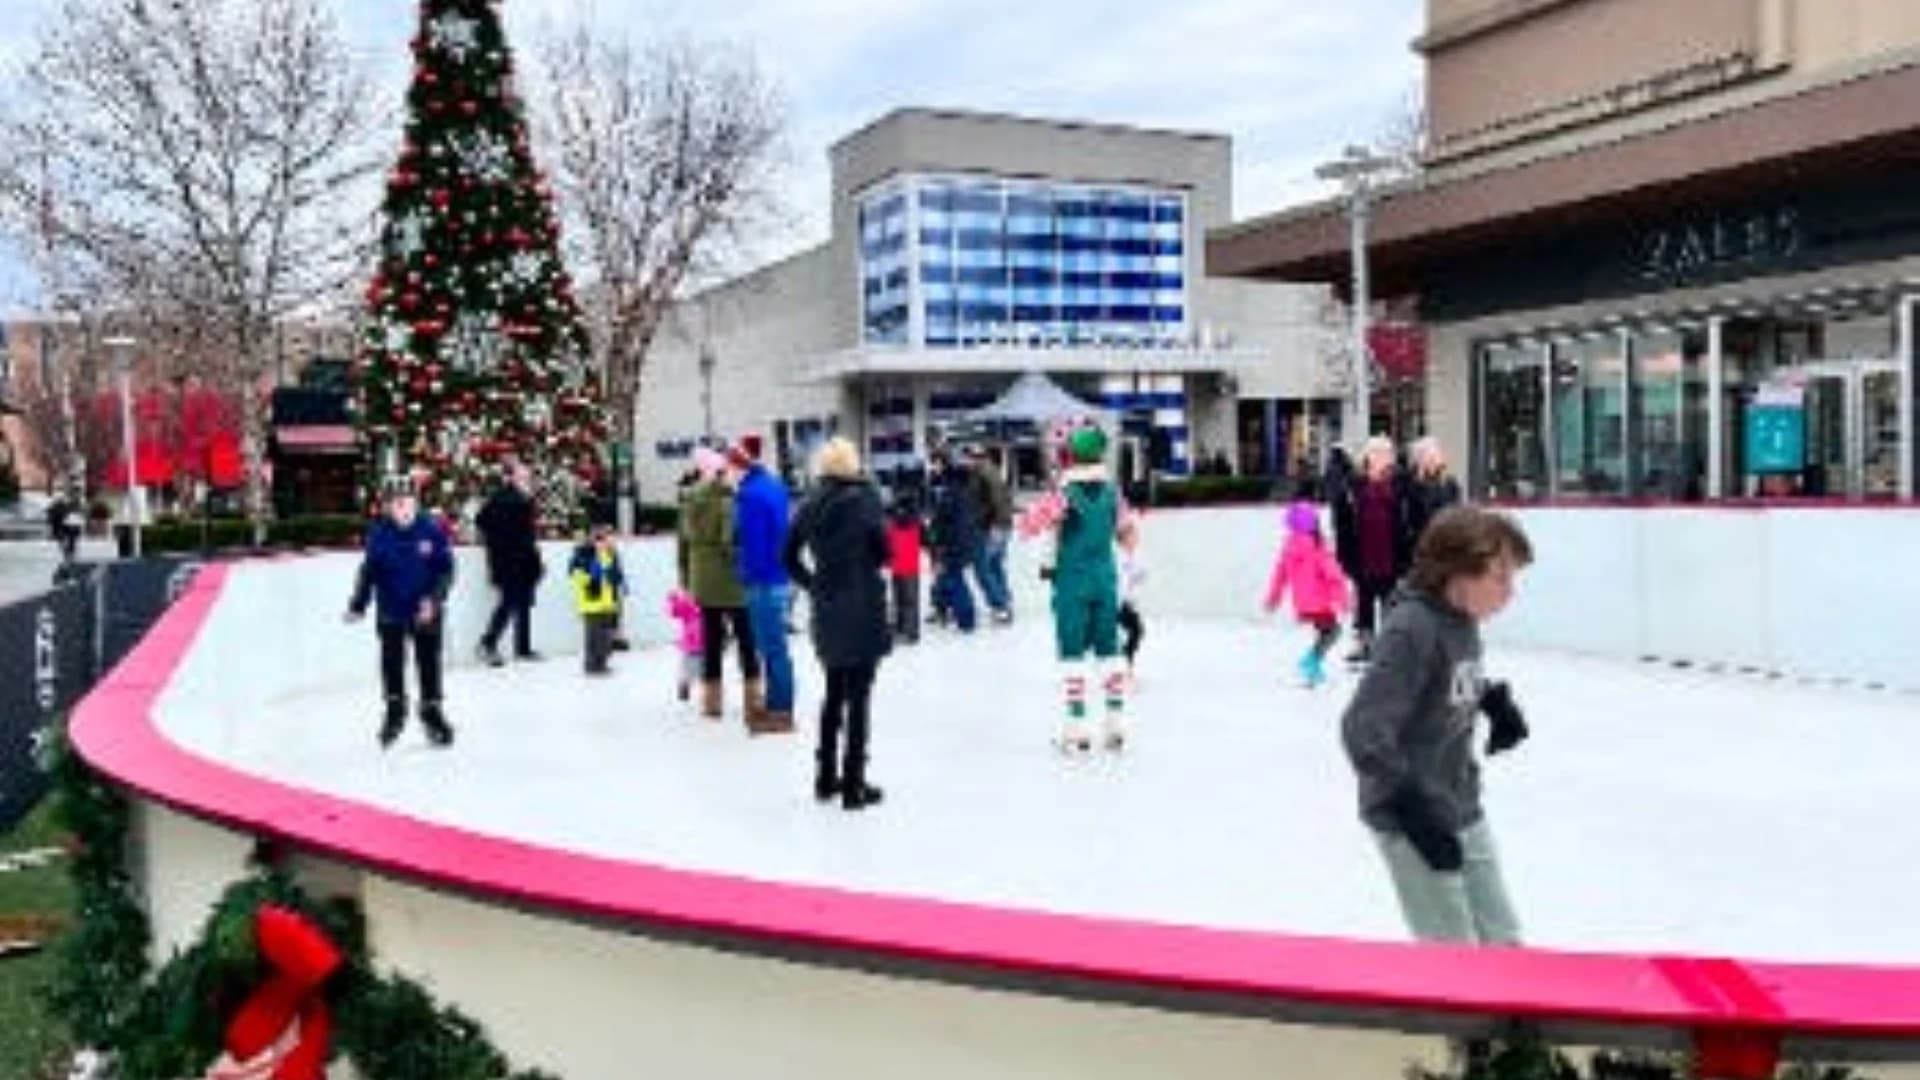 Pop-up ice skating rink to open next weekend in Westchester